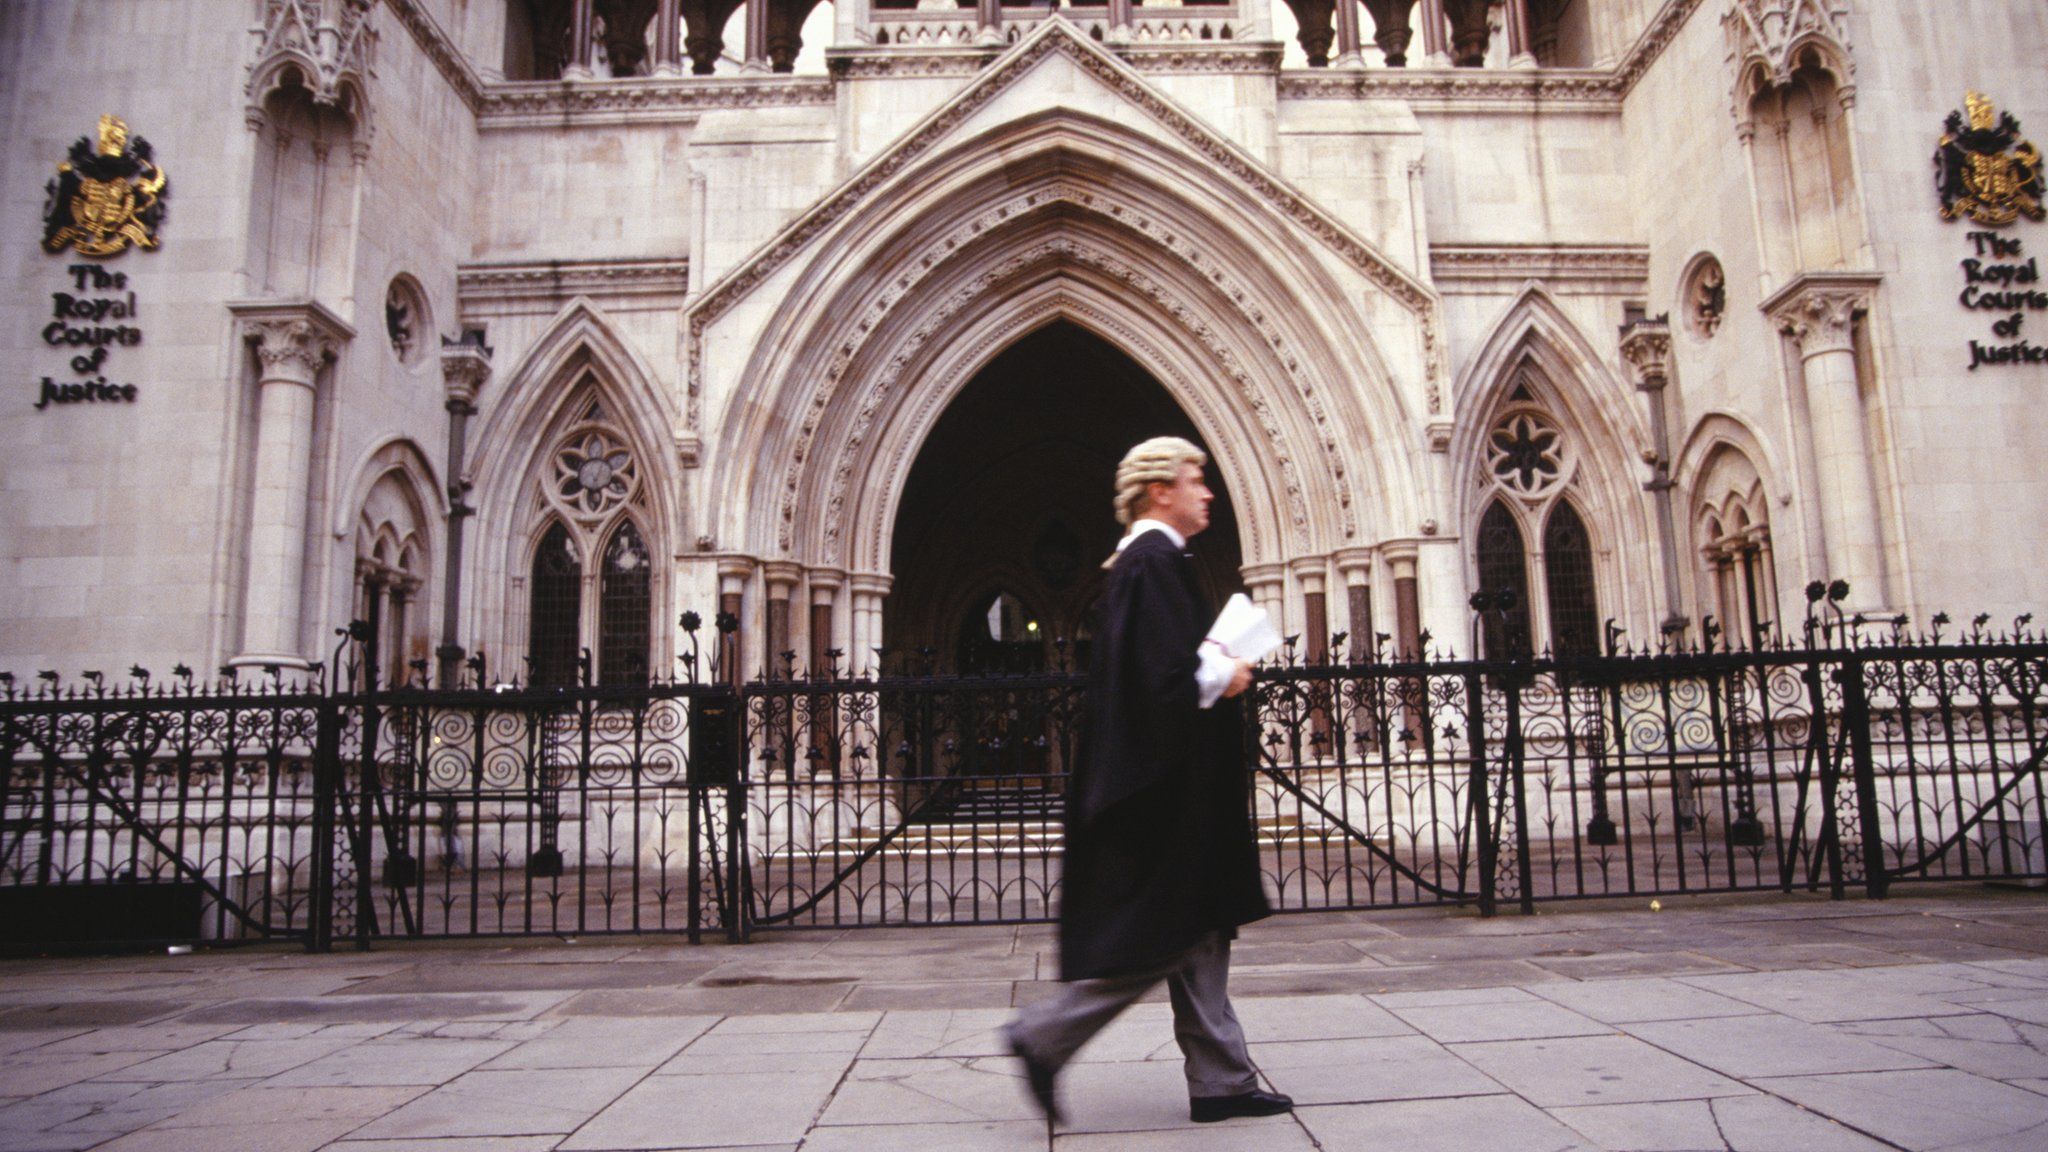 A barrister outside the Royal Courts of Justice